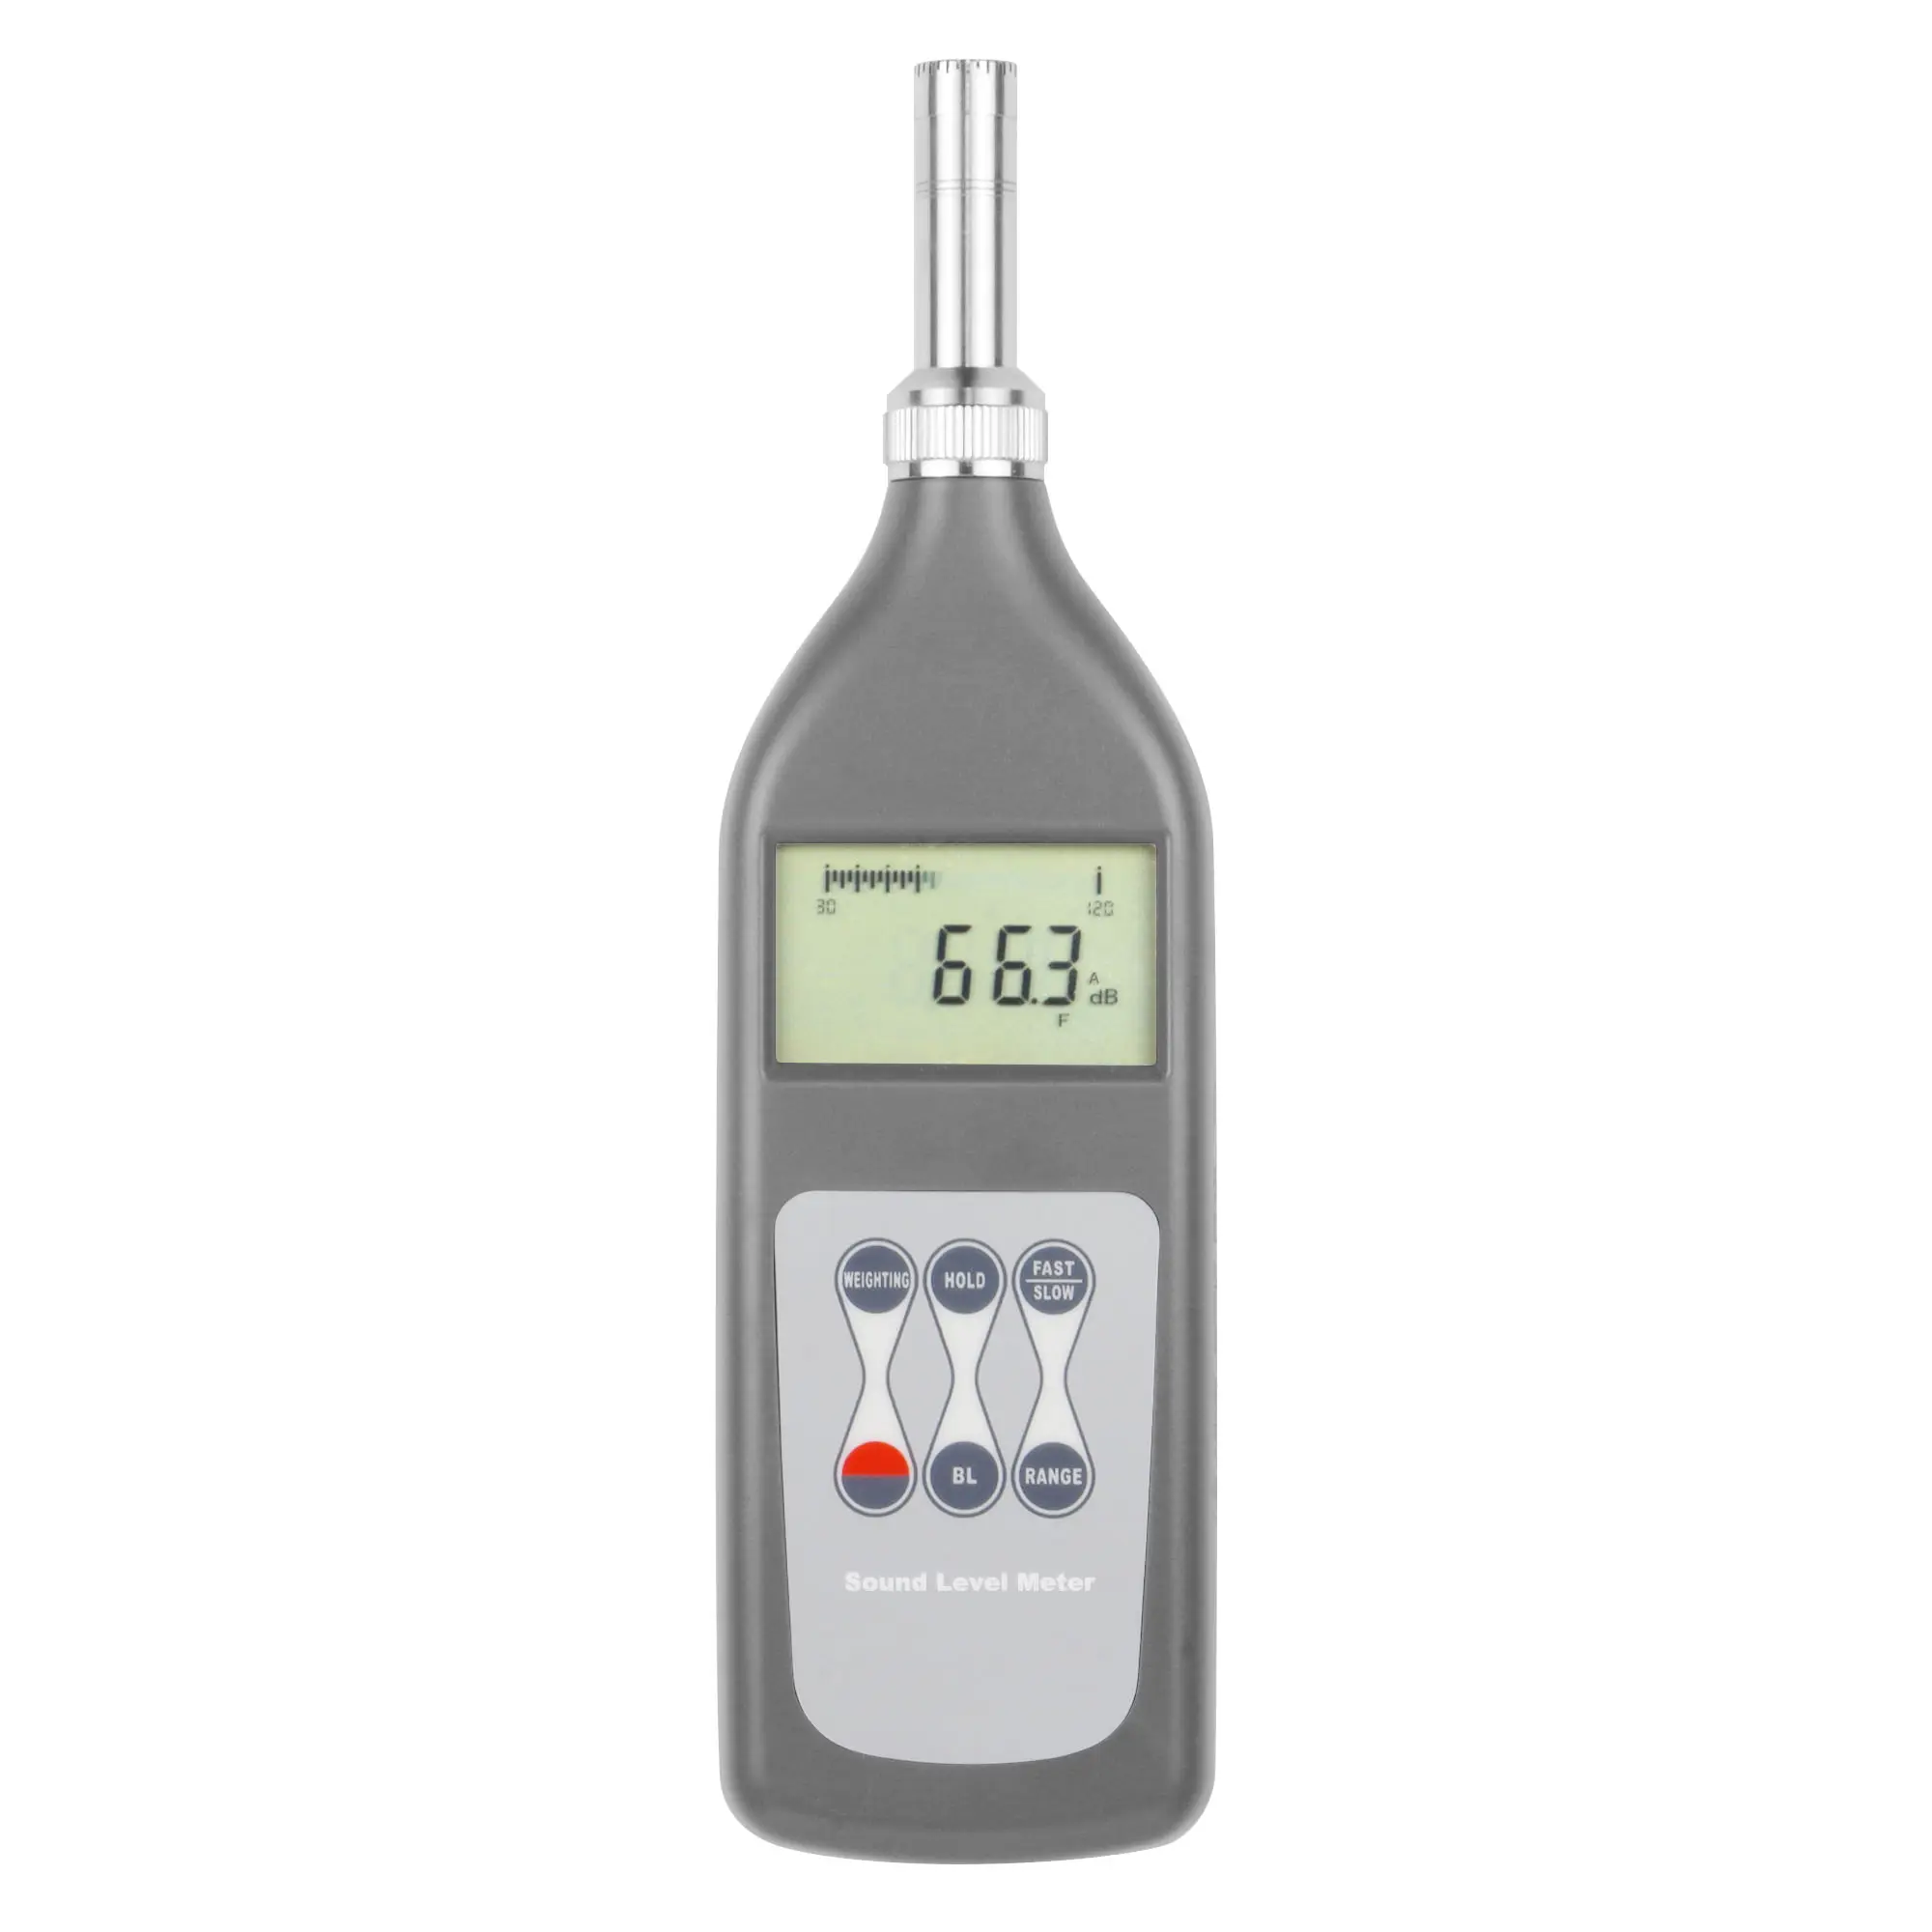 High-precision Accurate for laboratory Sound Level Meter SL-5868N Range 25dB~130dB (A)